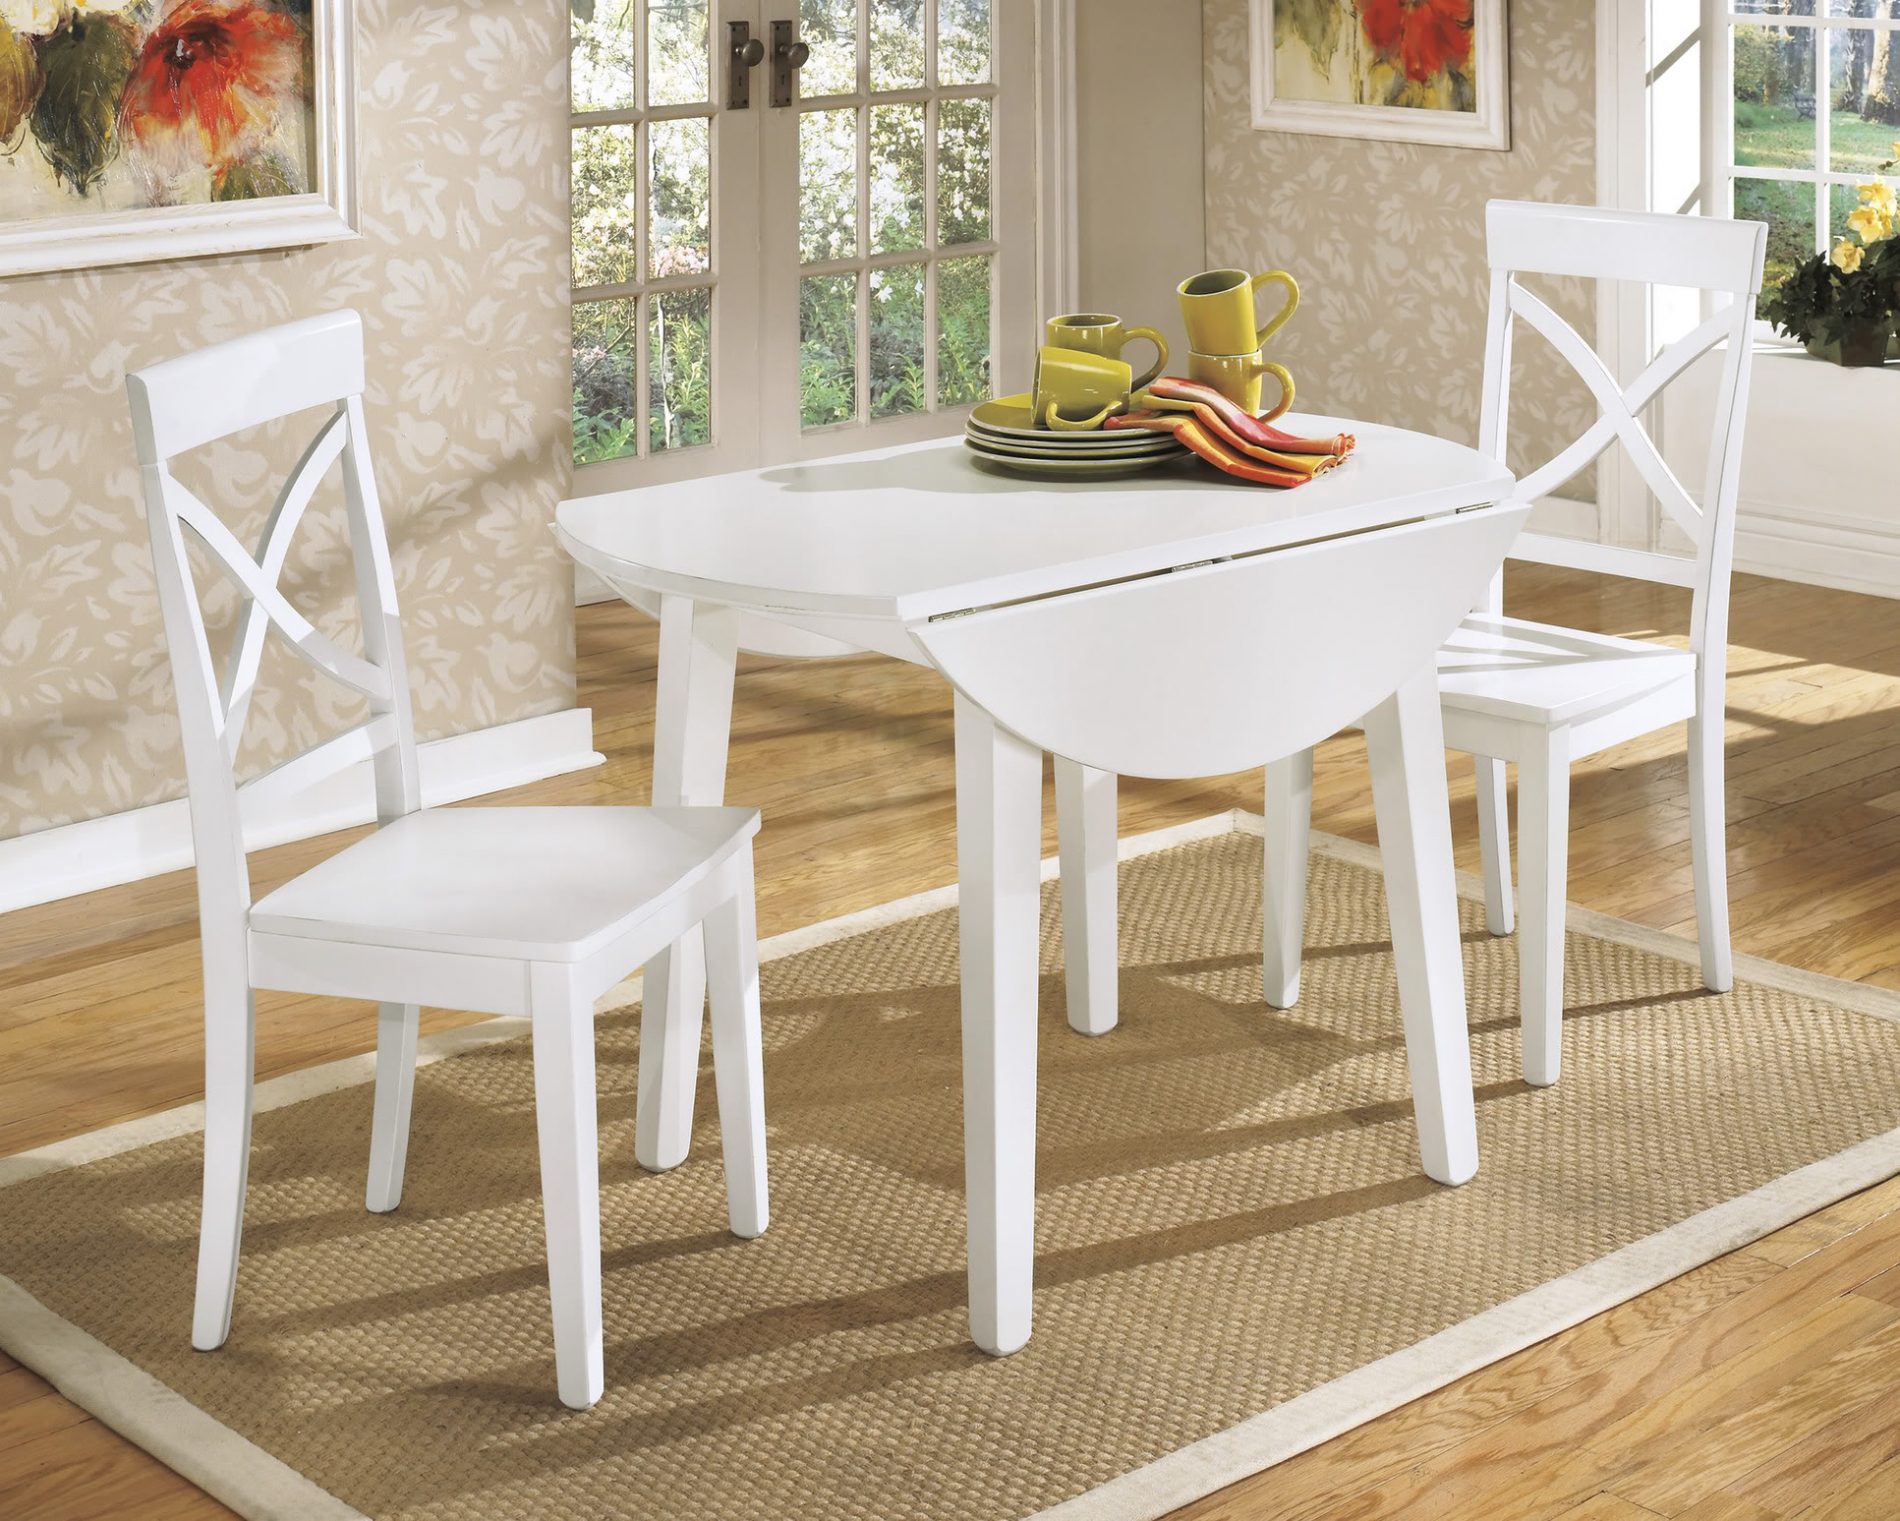 5 Great Advantages Of White Kitchen Tables And Chairs